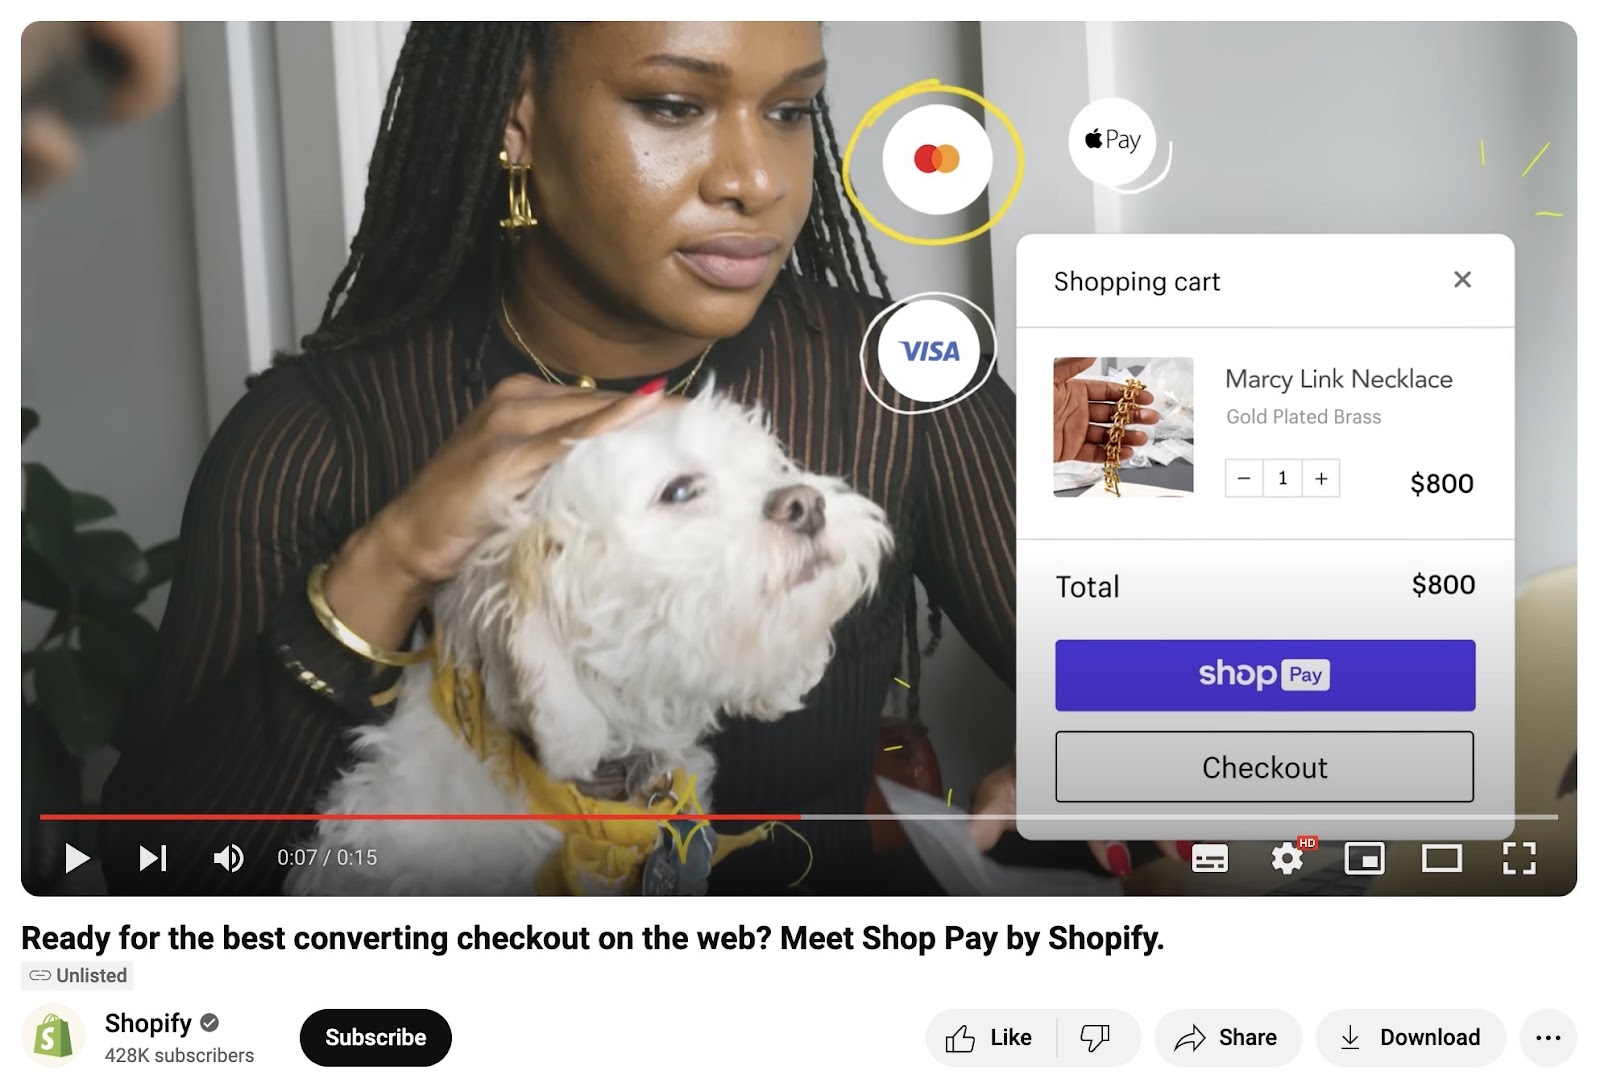 Shopify using a video ad on Youtube to explain the benefits on their product, Shopify Pay.